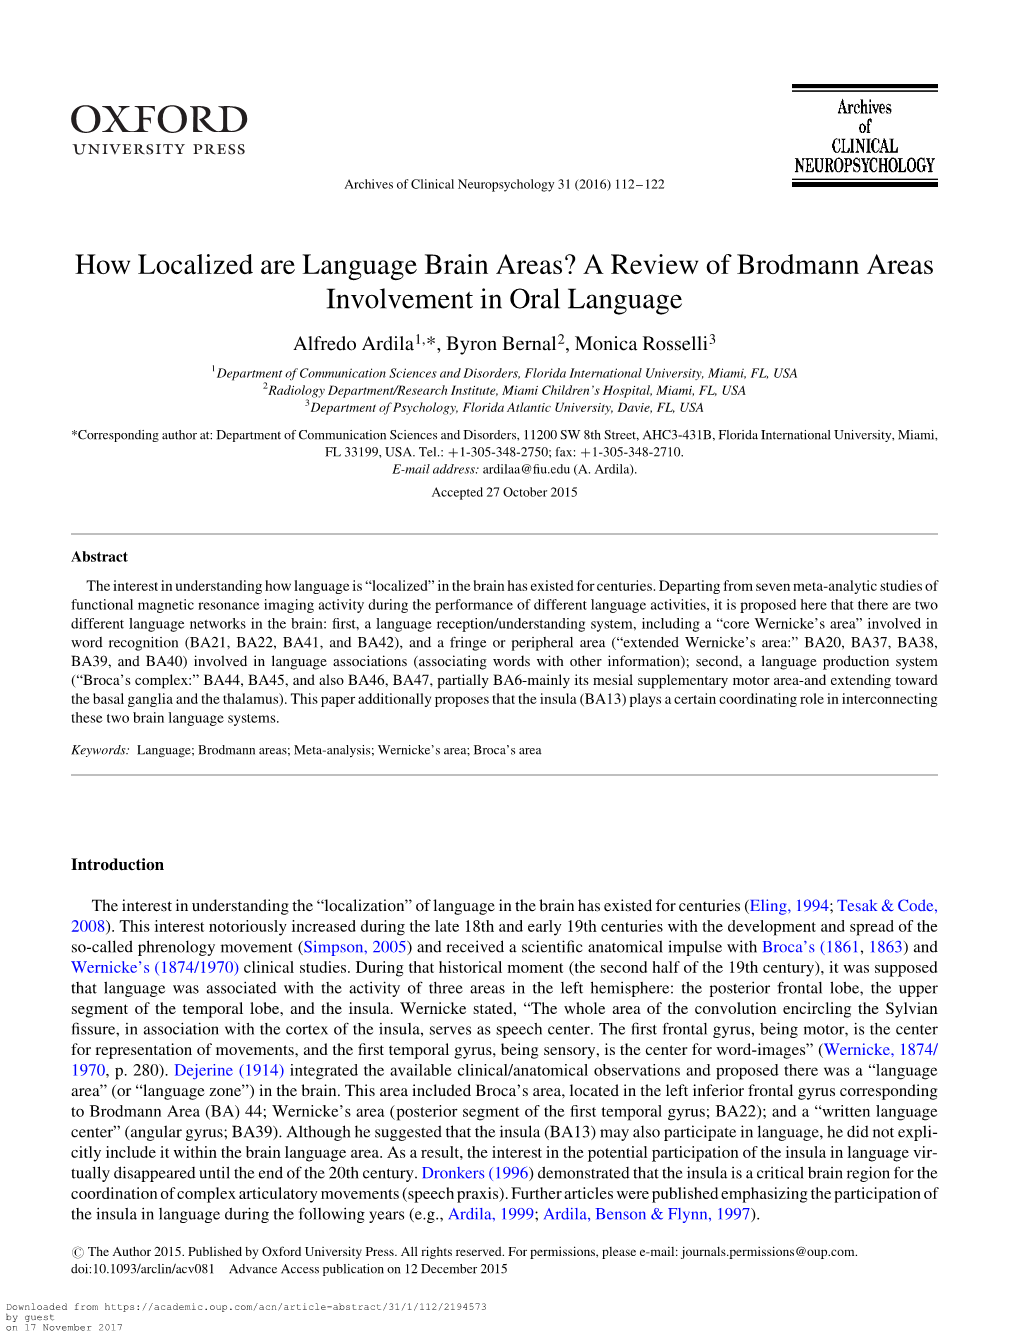 How Localized Are Language Brain Areas? a Review of Brodmann